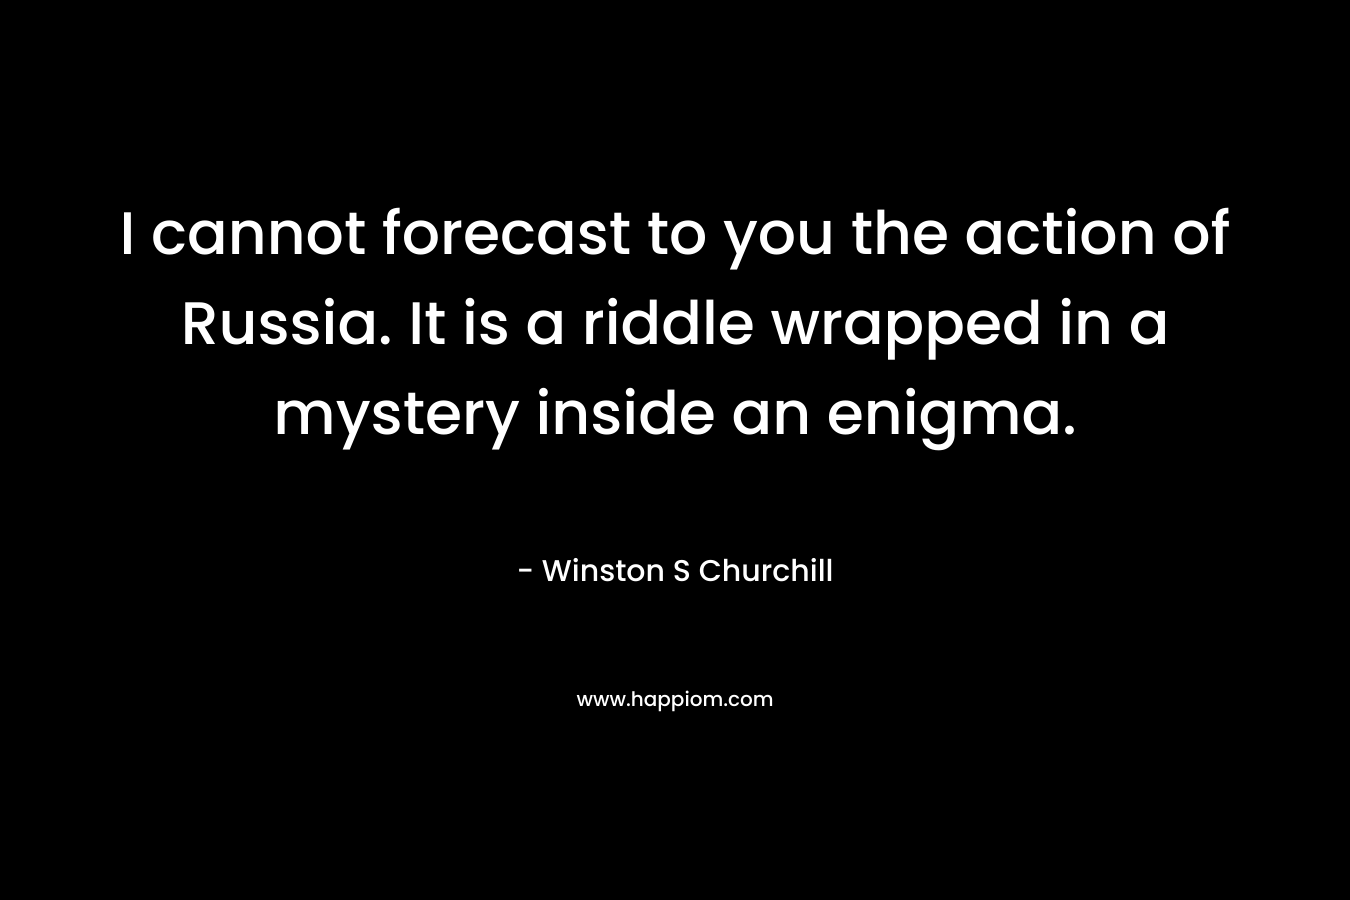 I cannot forecast to you the action of Russia. It is a riddle wrapped in a mystery inside an enigma. – Winston S Churchill